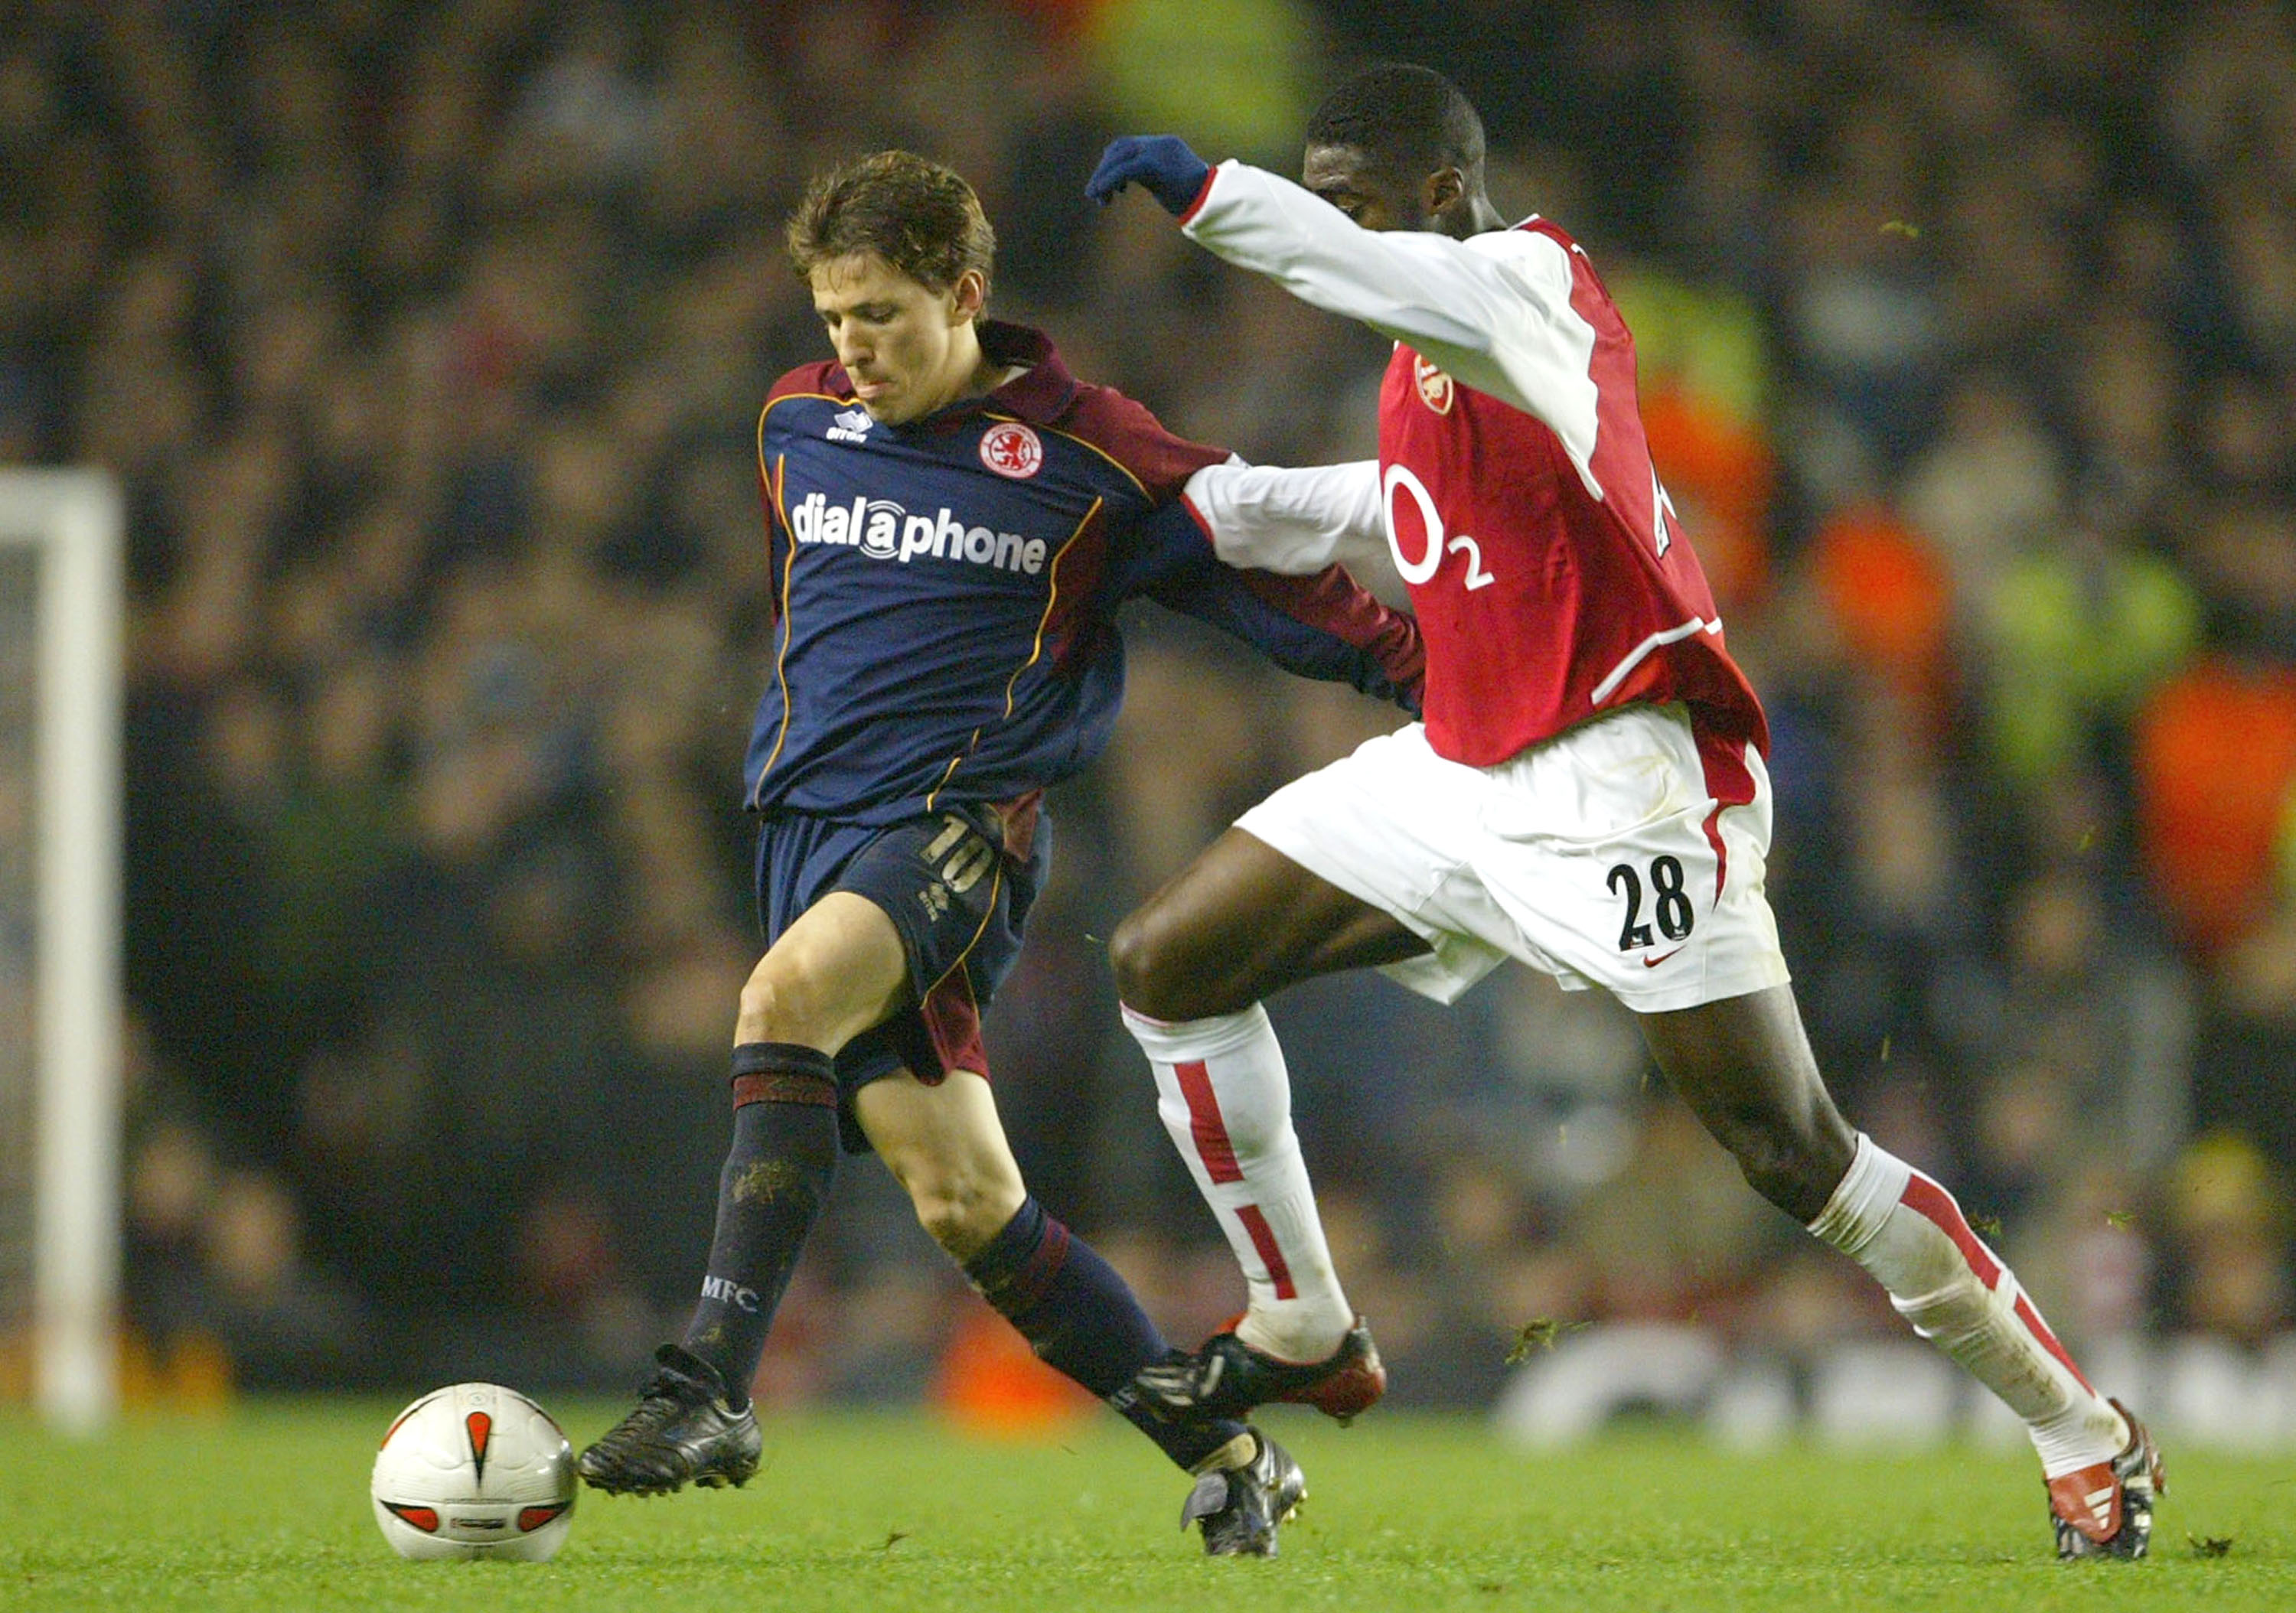 LONDON - JANUARY 20:  Juninho of Middlesbrough is challenged by Kolo Toure of Arsenal during the Carling Cup Semi-Final first leg match between Arsenal and Middlesbrough on January 20, 2004 at Highbury in London, England.  (Photo by Phil Cole/Getty Images